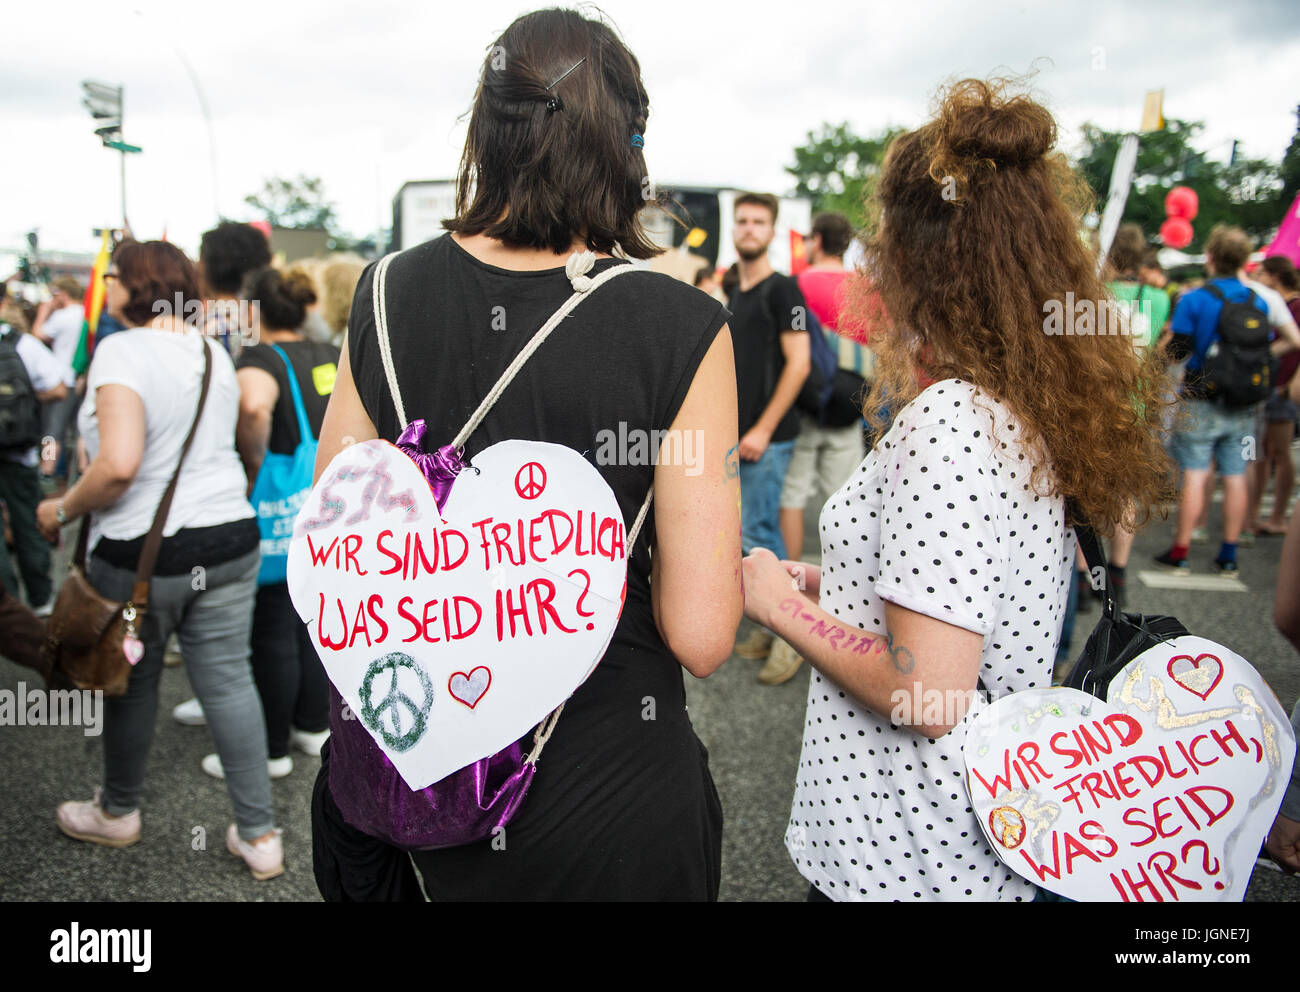 Hamburg, Germany. 8th July, 2017. Two demonstrators carry signs reading 'Wir sind friedlich was seid ihr?' (lit. 'We are peaceful what are you?') during the 'Grenzenlose Solidaritaet statt G20' demonstration (lit. 'Borderless solidarity instead of G20') in Hamburg, Germany, 8 July 2017. The two-day summit, a meeting of the leaders of the twenty largest world economies as well as representatives of a variety of international institutions, concludes today. Photo: Christina Sabrowsky/dpa/Alamy Live News Stock Photo